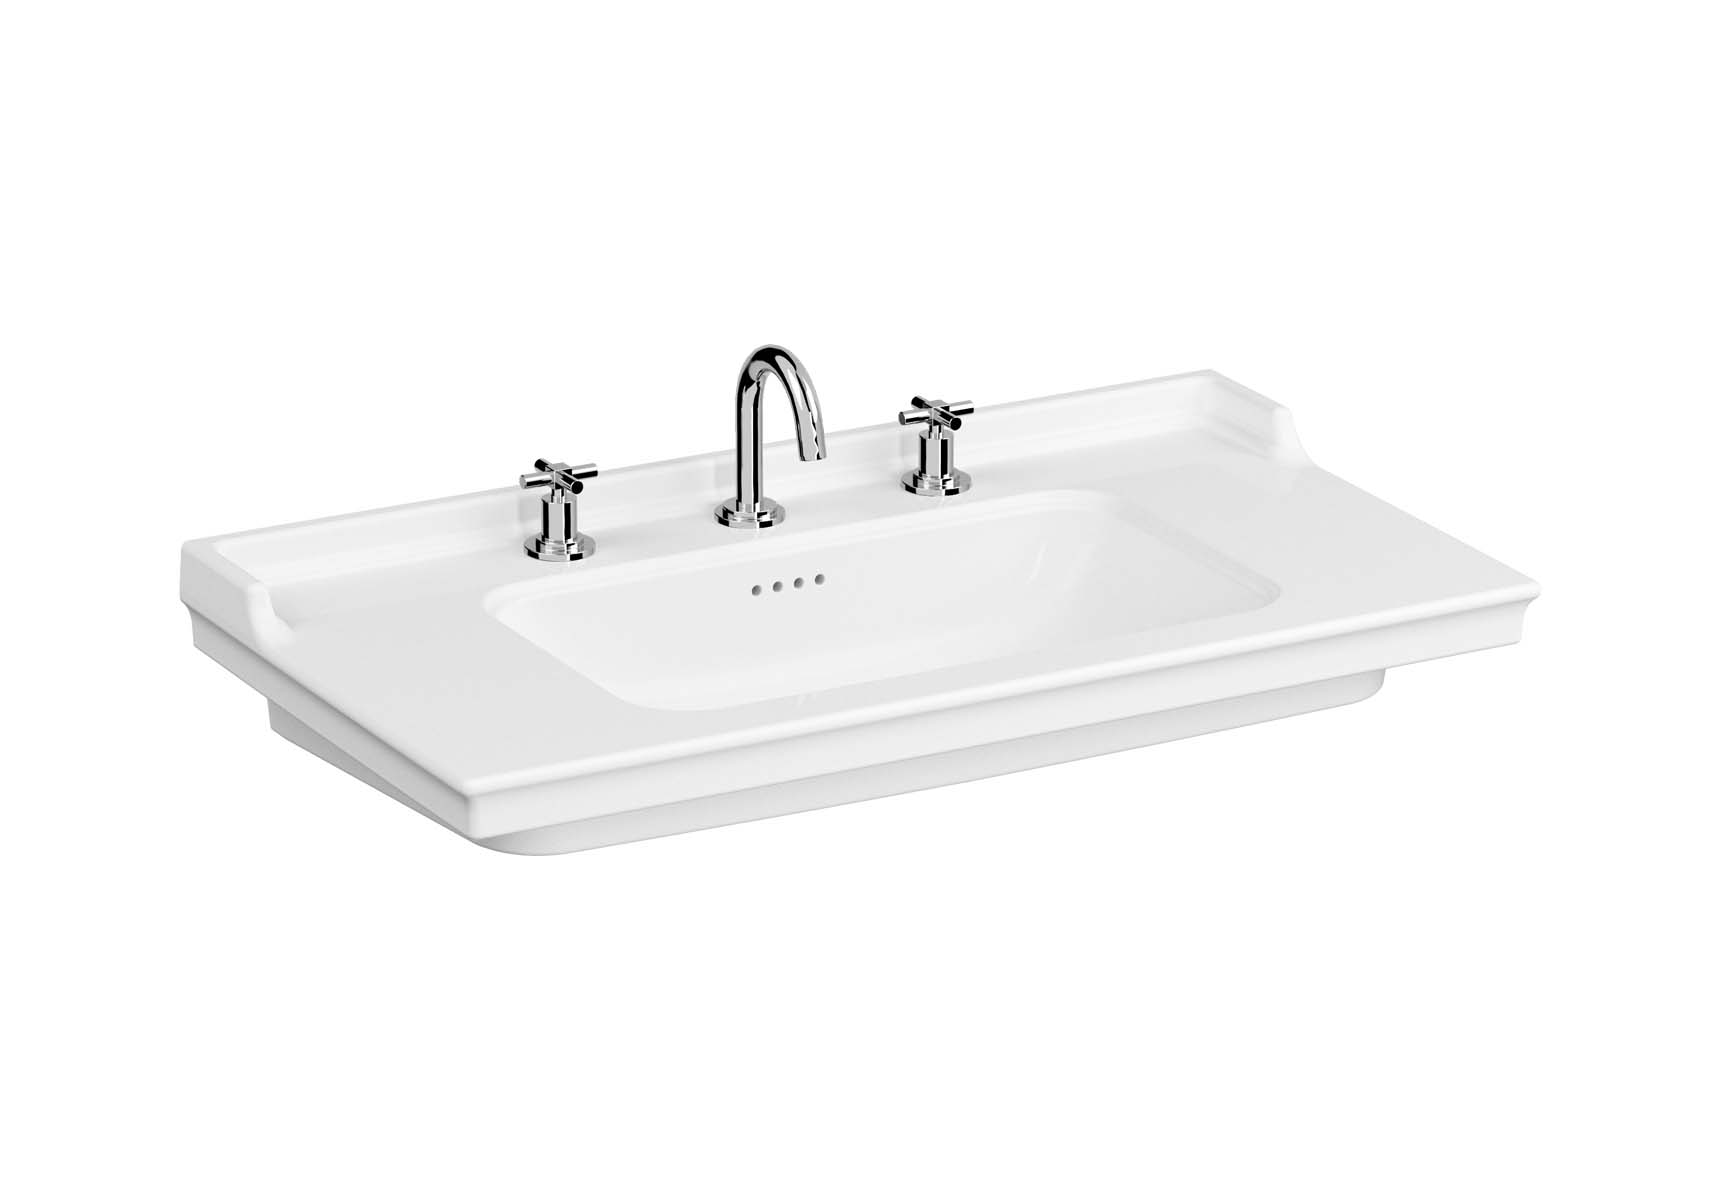 Vanity Basin, 100 cm, One Tap Hole, With Overflow Hole